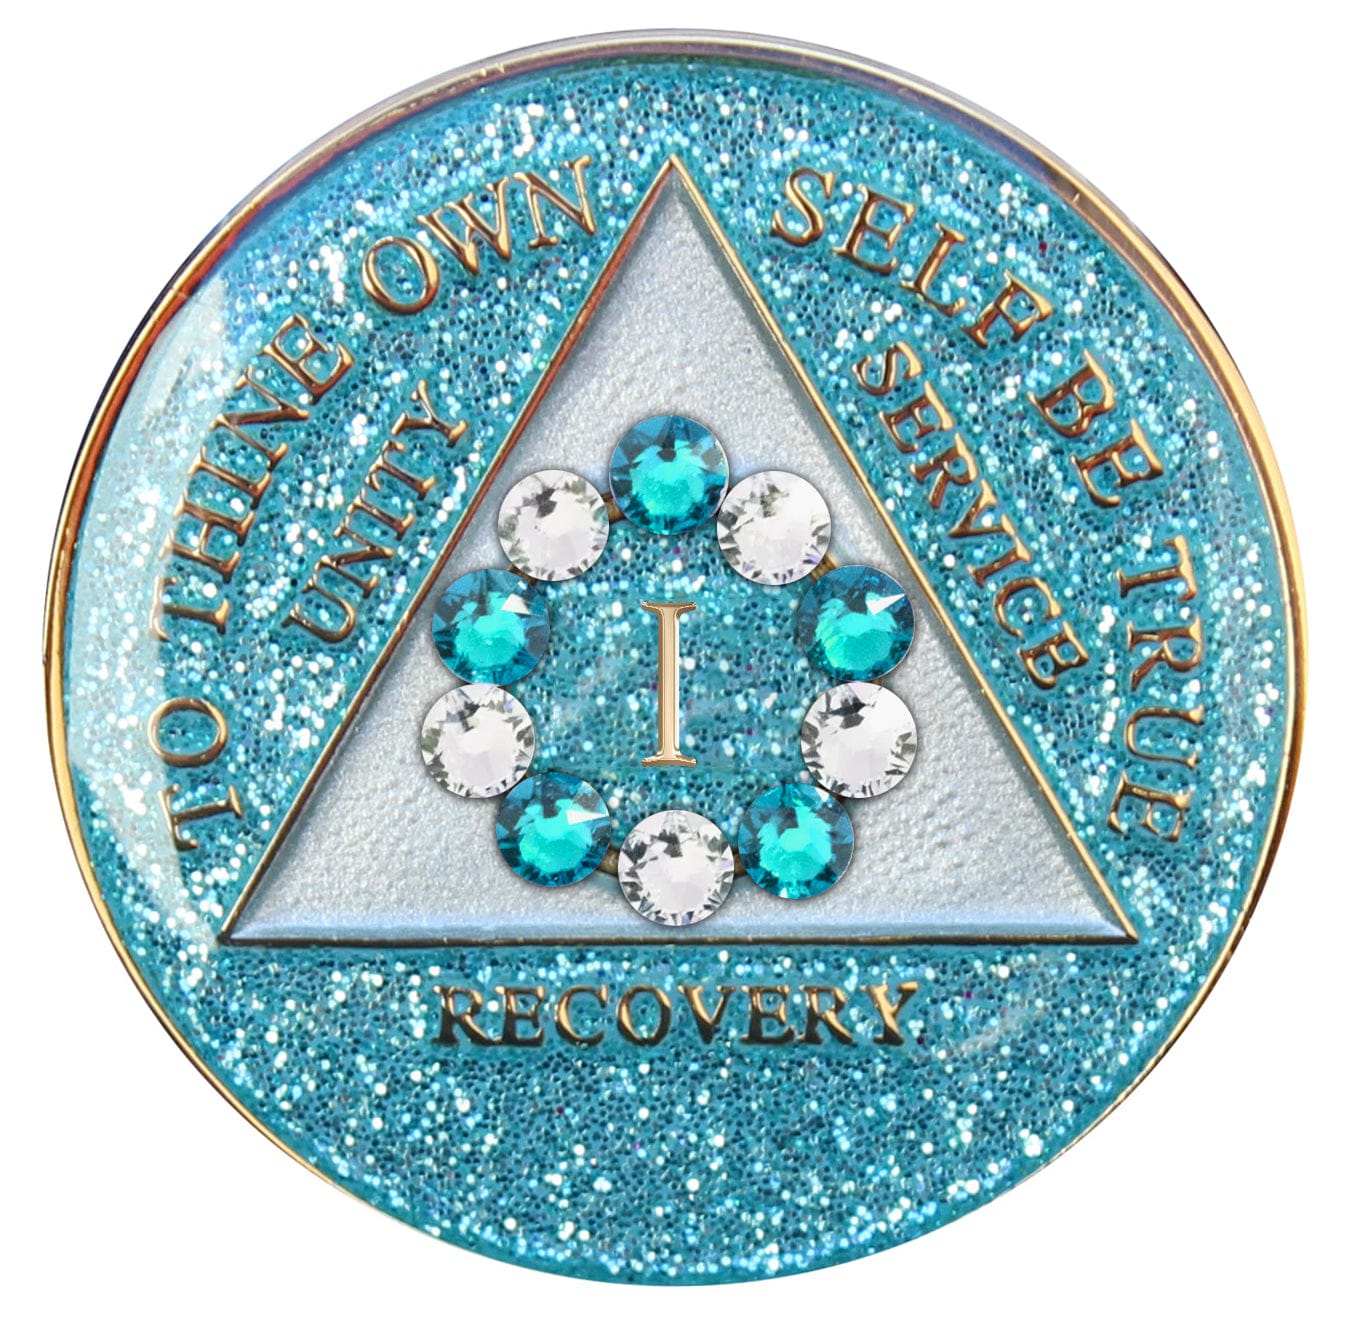 1 Year Deep-sea Aqua glitter 10th step AA medallion with 5 blue genuine crystals and 5 clear genuine crystal, formed in a circle around the year, to thine own self be true, triangle in the center and unity, service, recovery, along with rim of medallion are slightly raised in 14k gold, the center of the triangle is pearl white with the circle being aqua glitter, all emphasizing action and reflection.